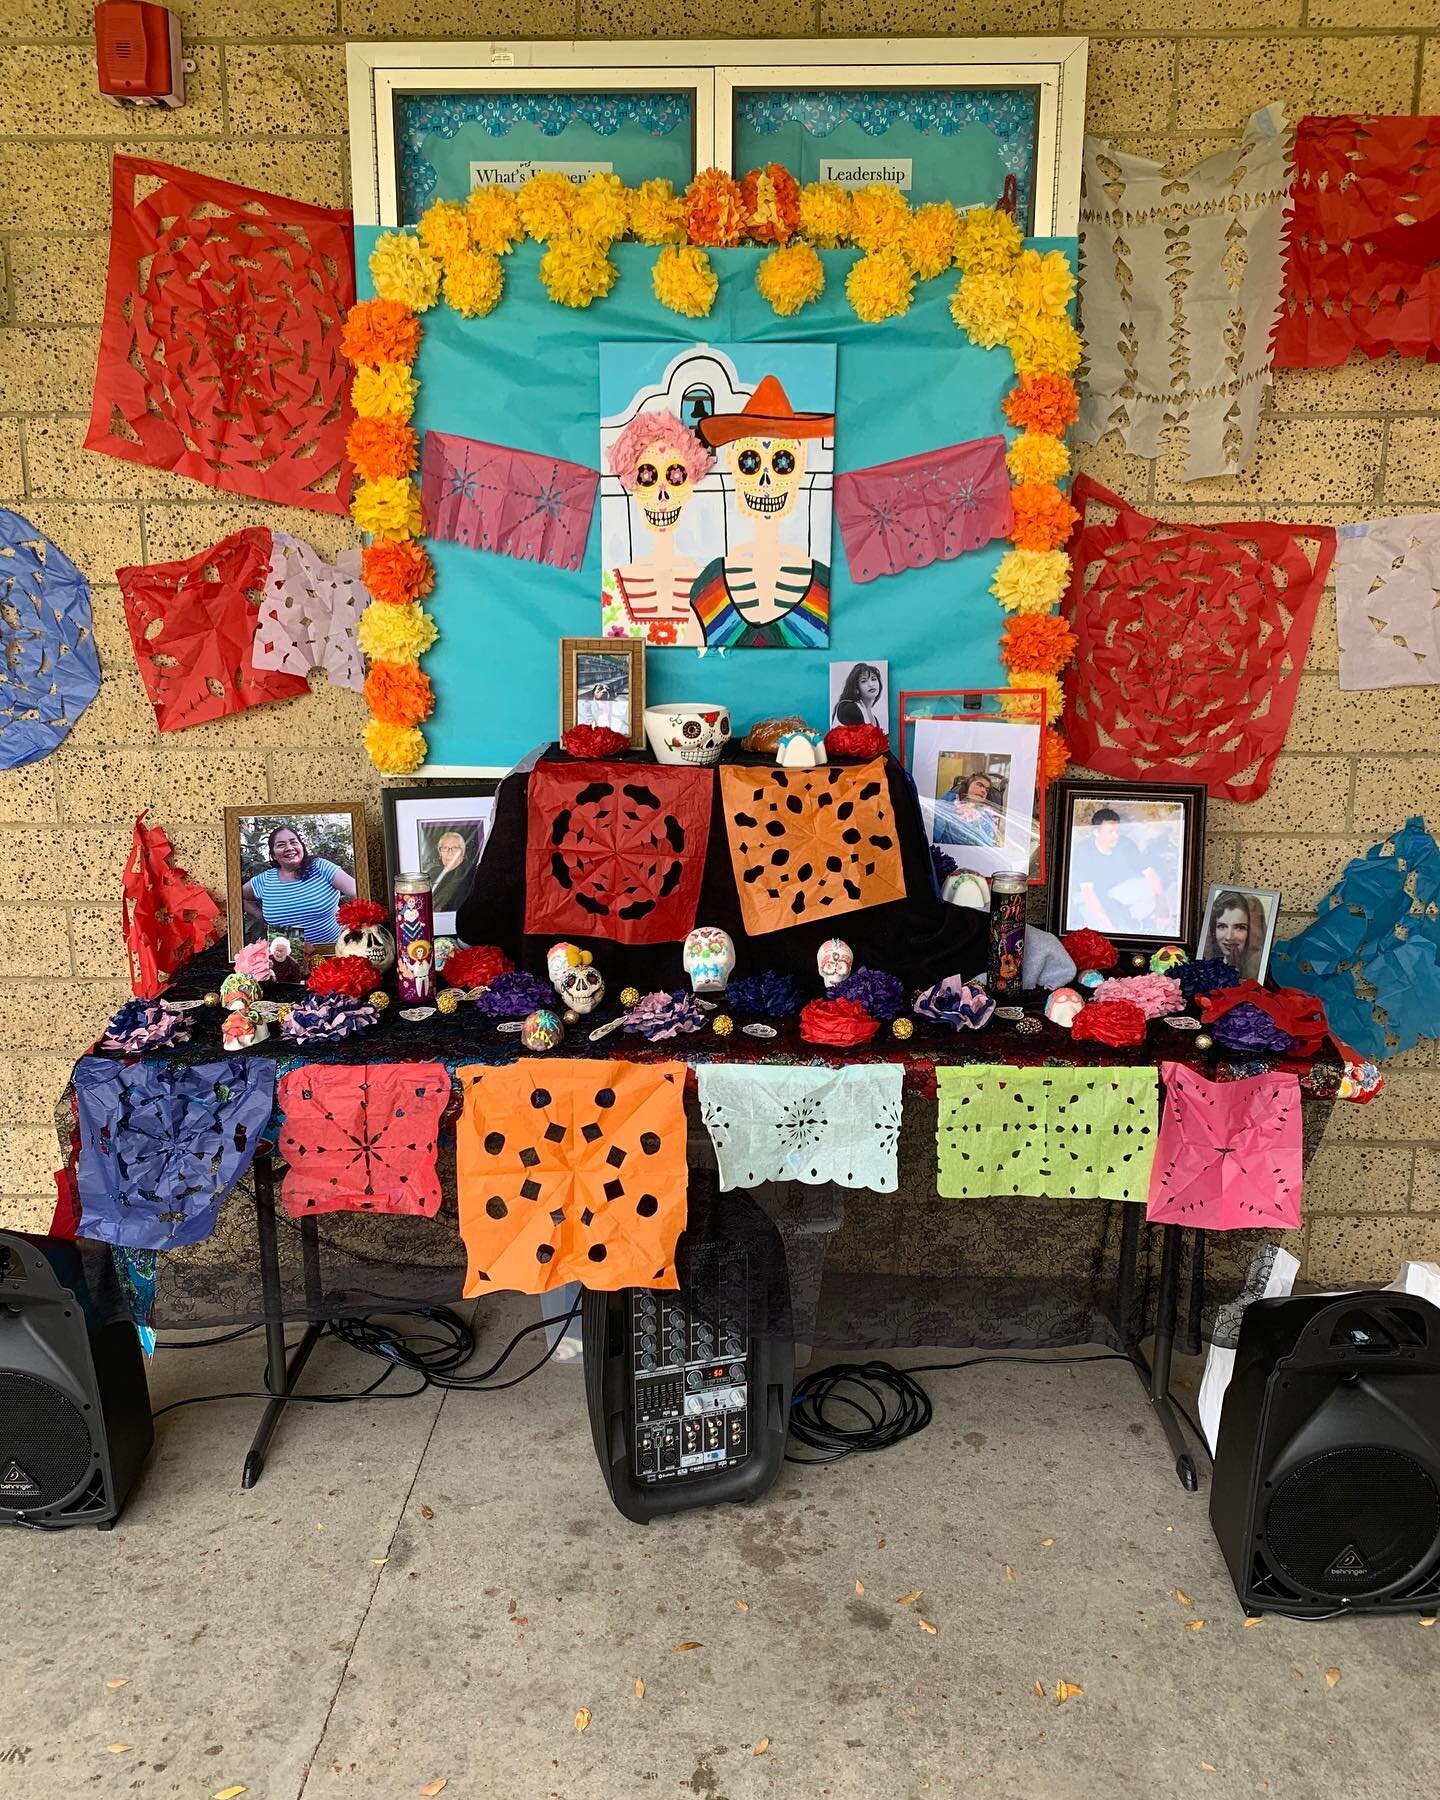 Our students did an amazing job in creating this beautiful altar for &ldquo;D&iacute;a de Muertos.&rdquo; They hand-made all the sugar skulls, banners, and flowers that are seen in this picture!! 

Thank you Latinx Club for hosting this school-wide c